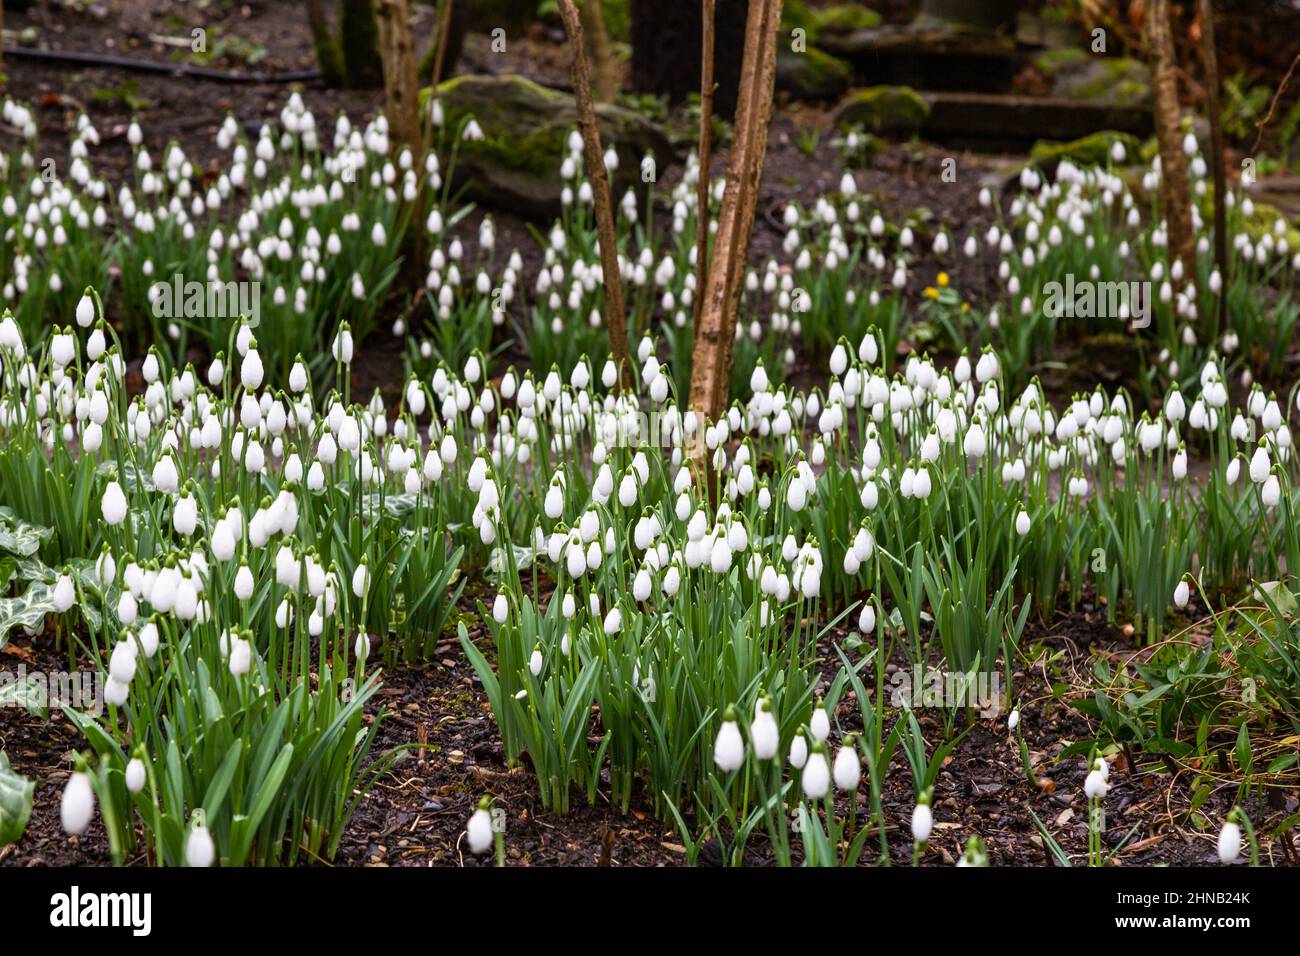 Snowdrop flowers (galanthus)covering the ground in a Yorkshire garden, England. Stock Photo